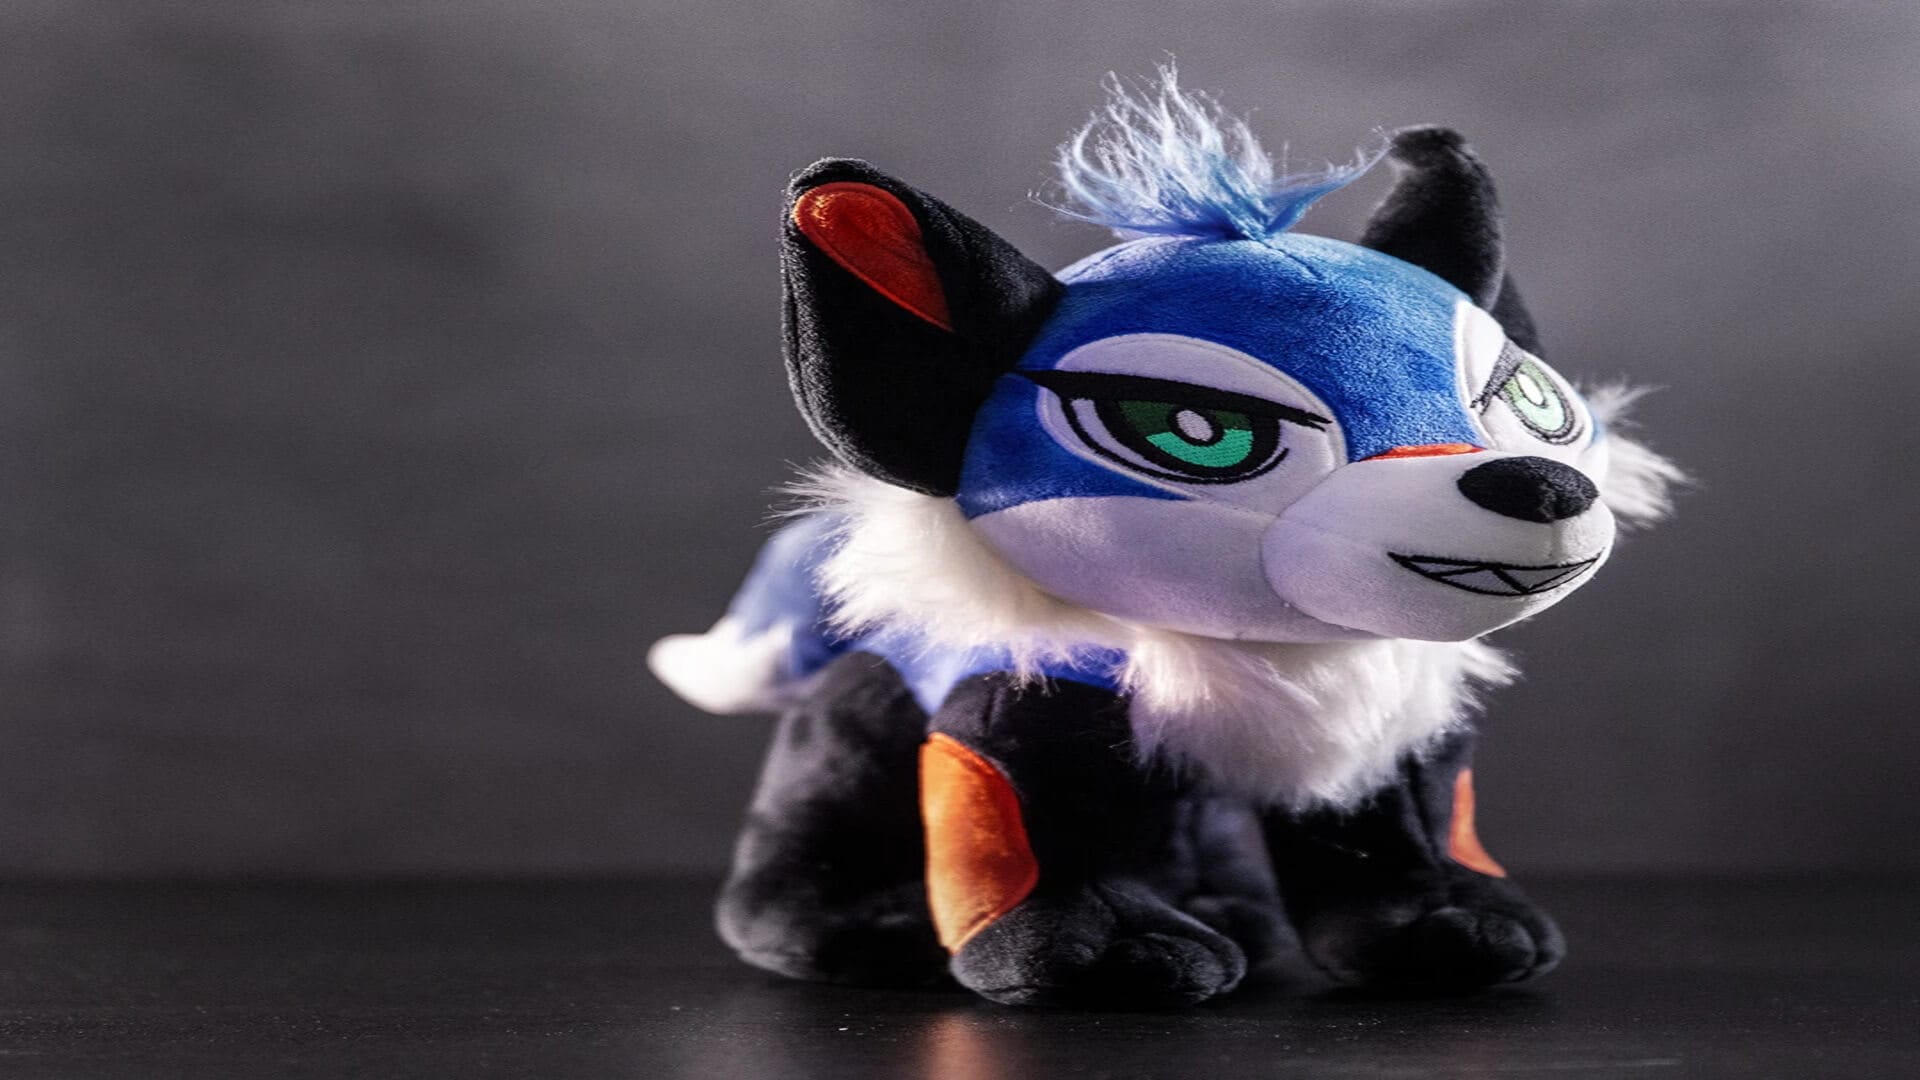 The SonicFox pluhsie as seen on the Evil Geniuses website.